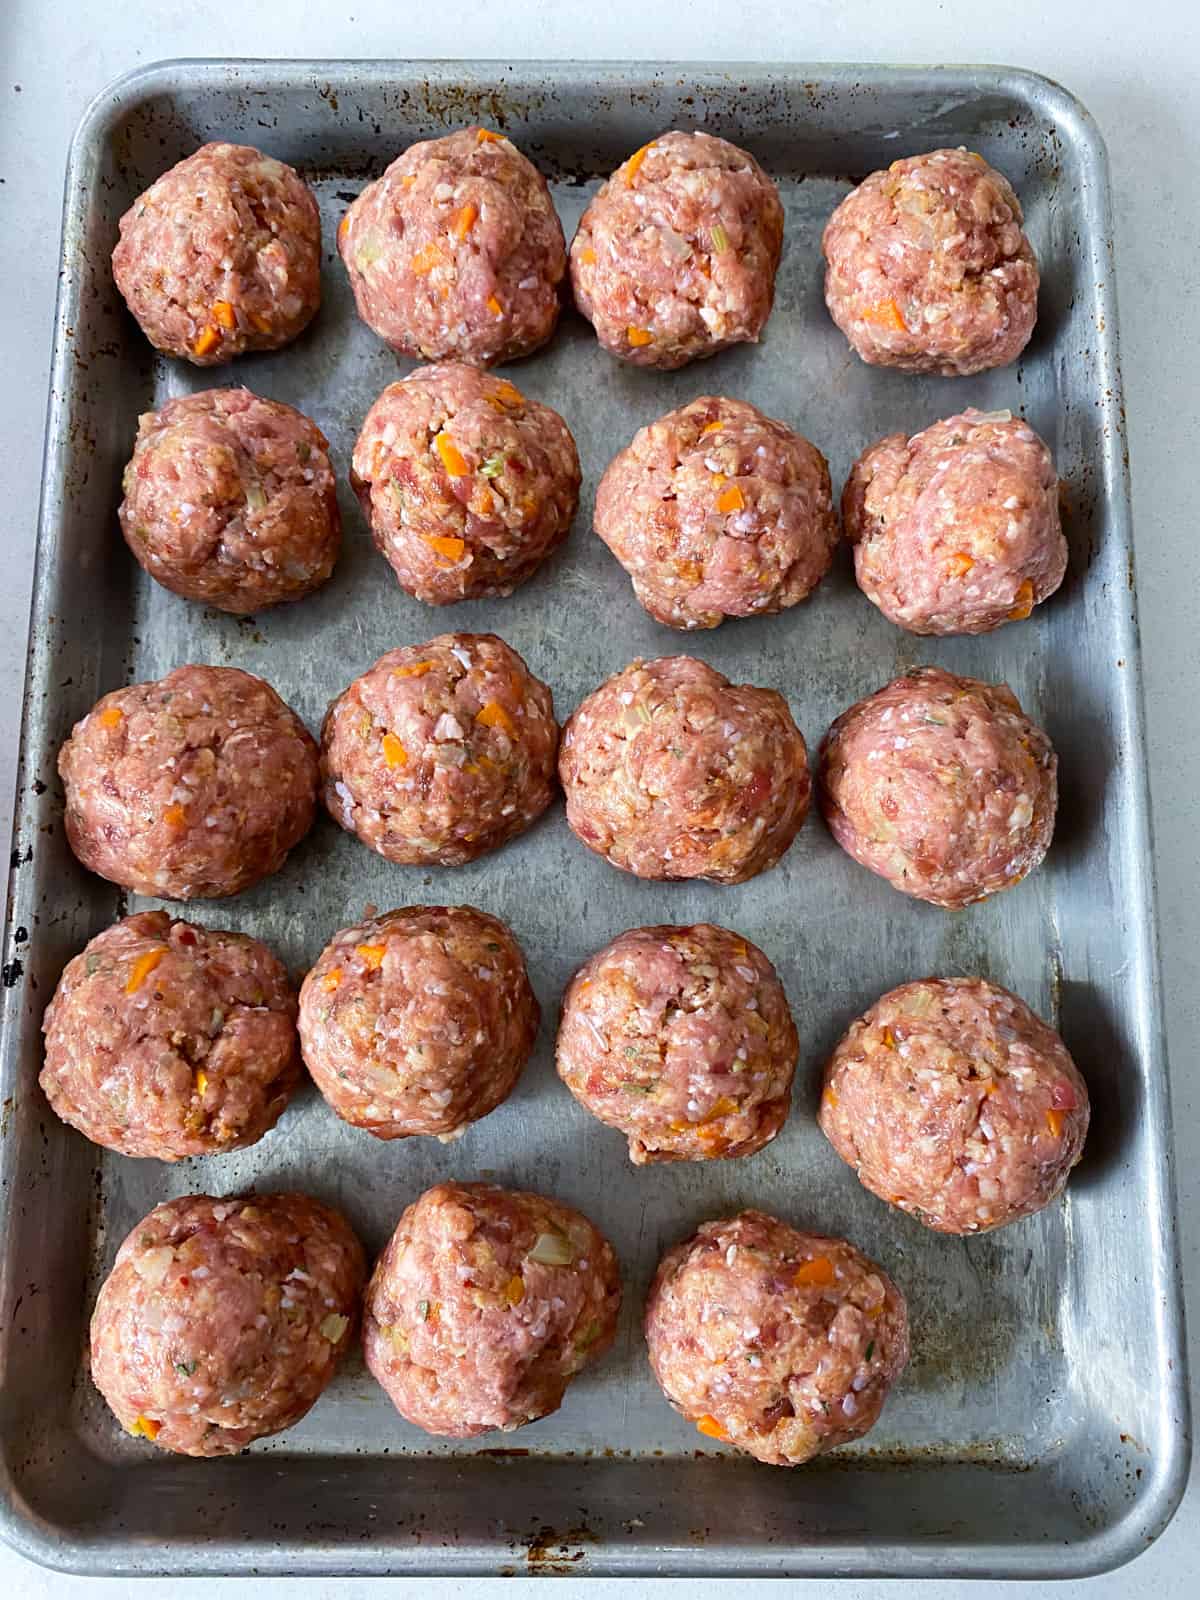 Form the turkey mixture into golf-ball sized meatballs.